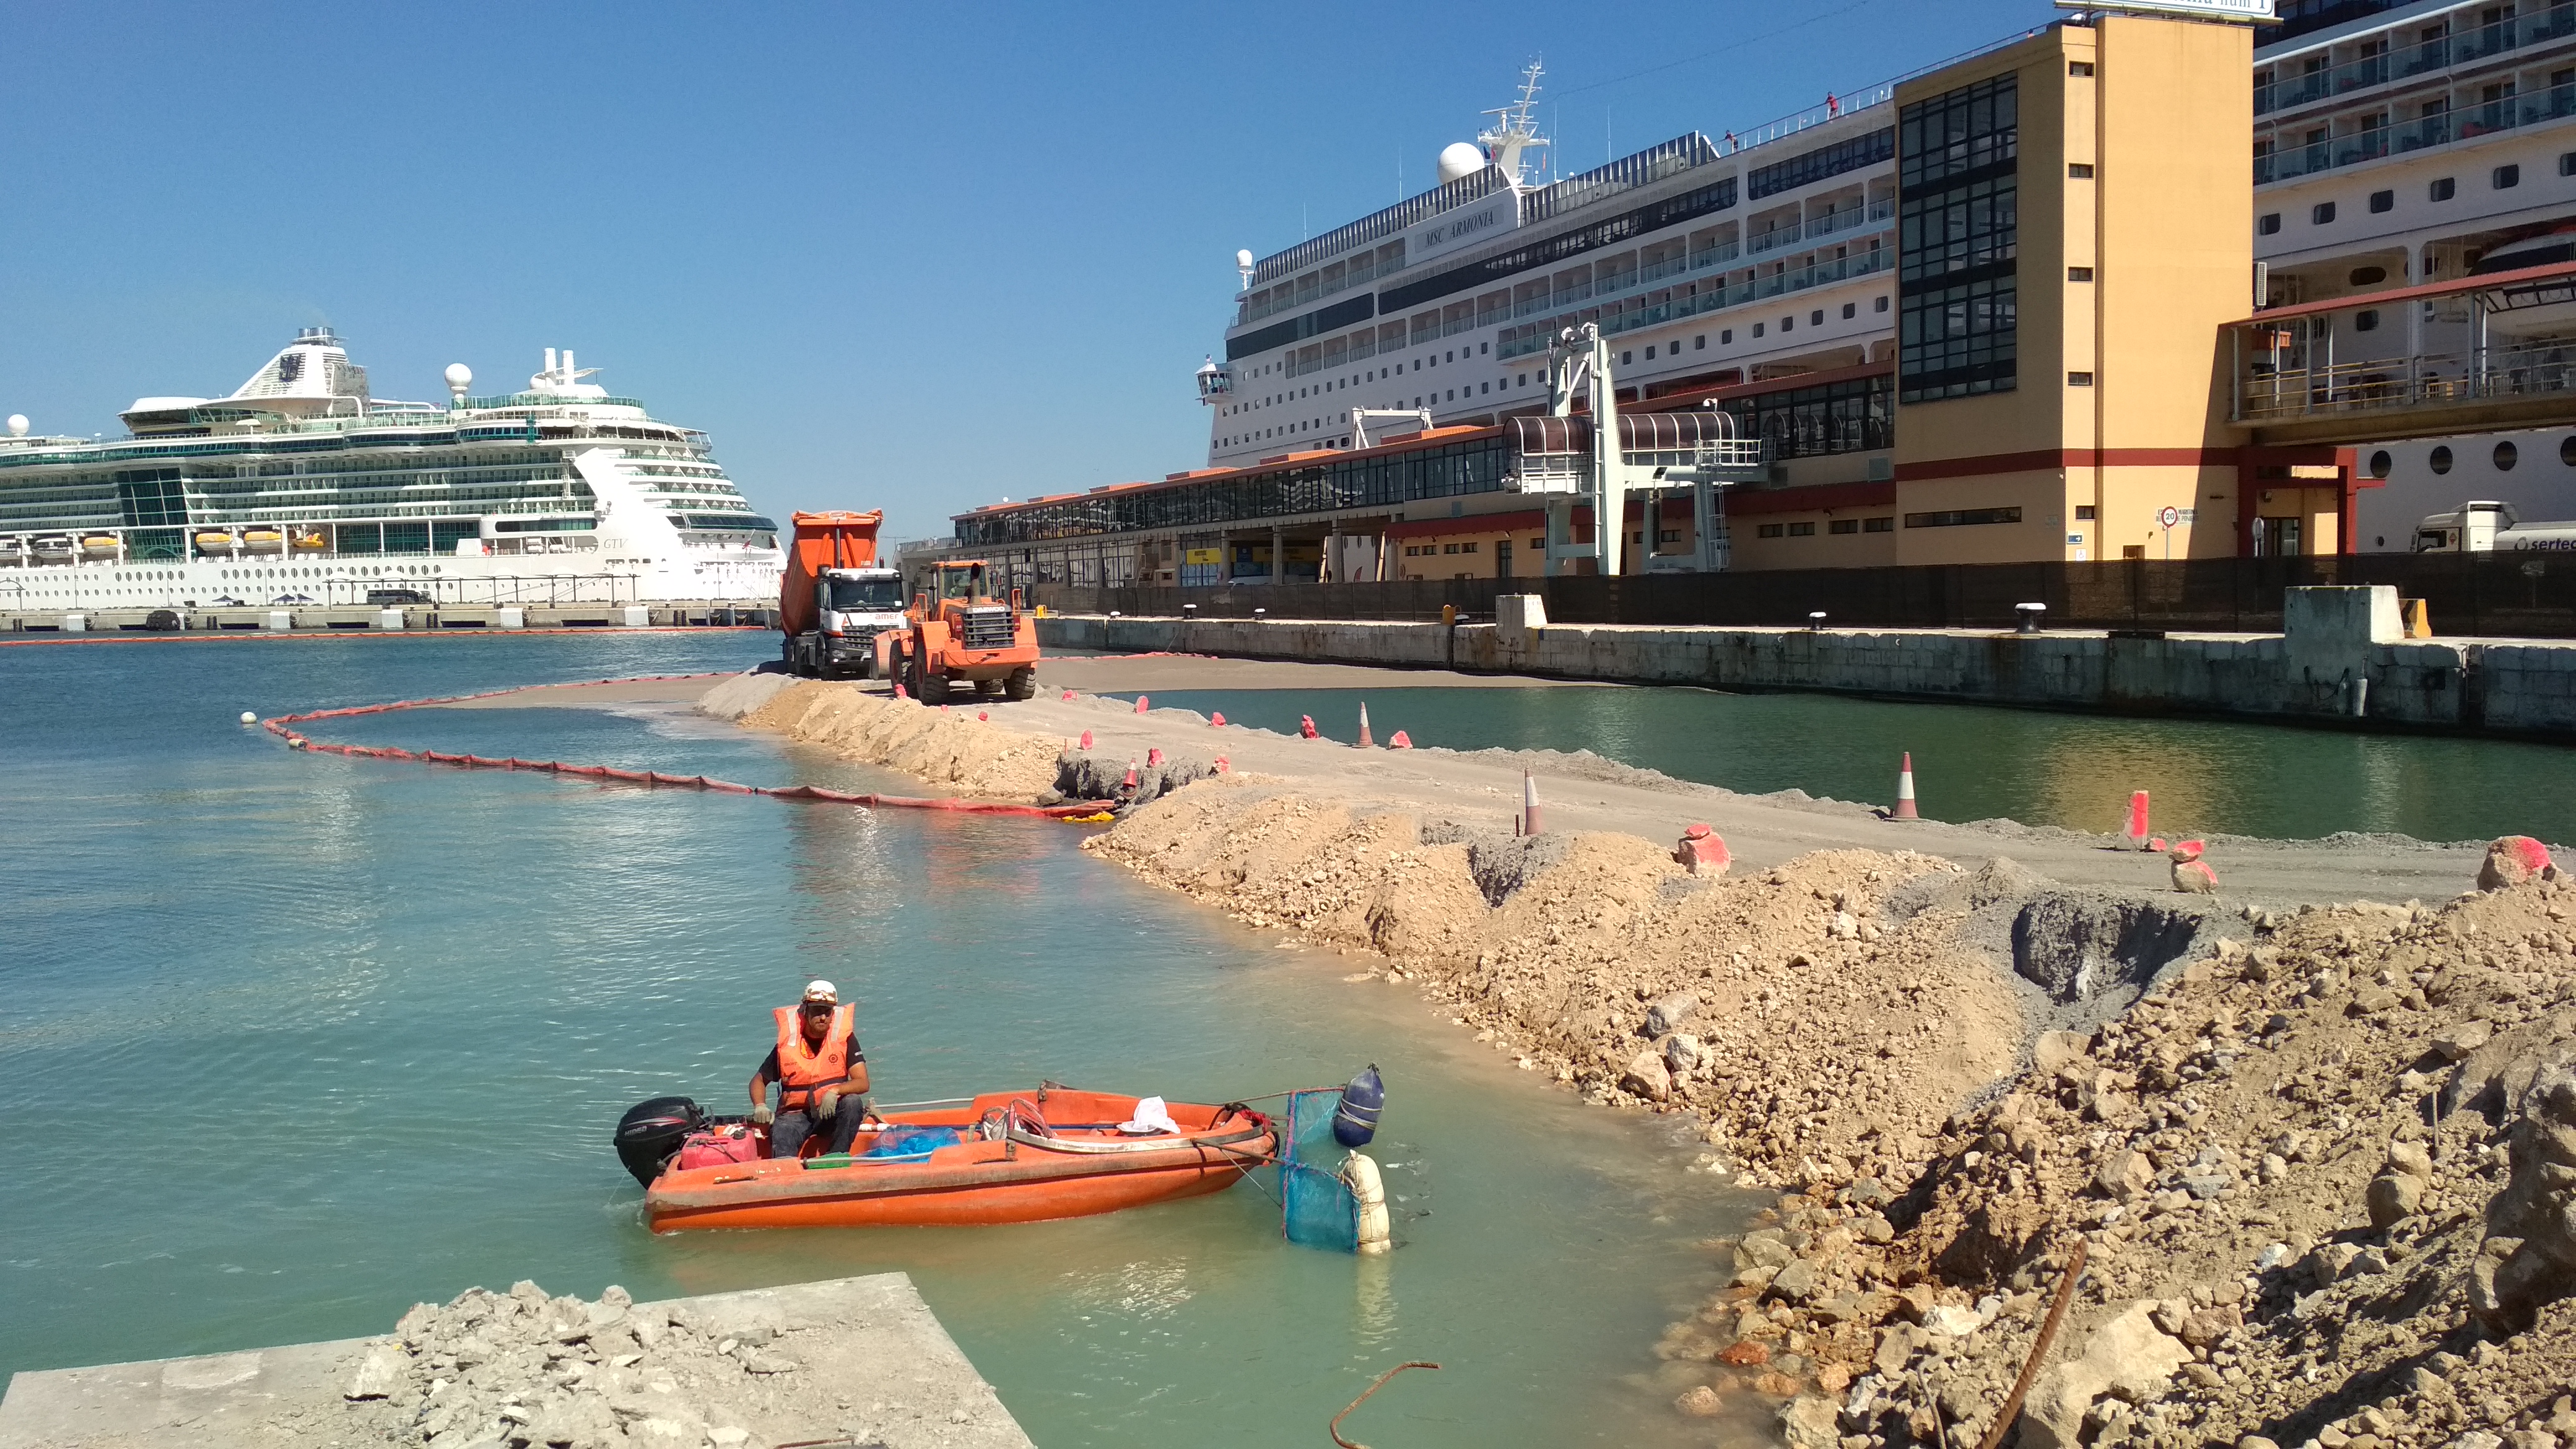 The Public Prosecution Office closes the file on the complaint by the GOB in relation to the expansion works on the Poniente Dock of the Port of Palma